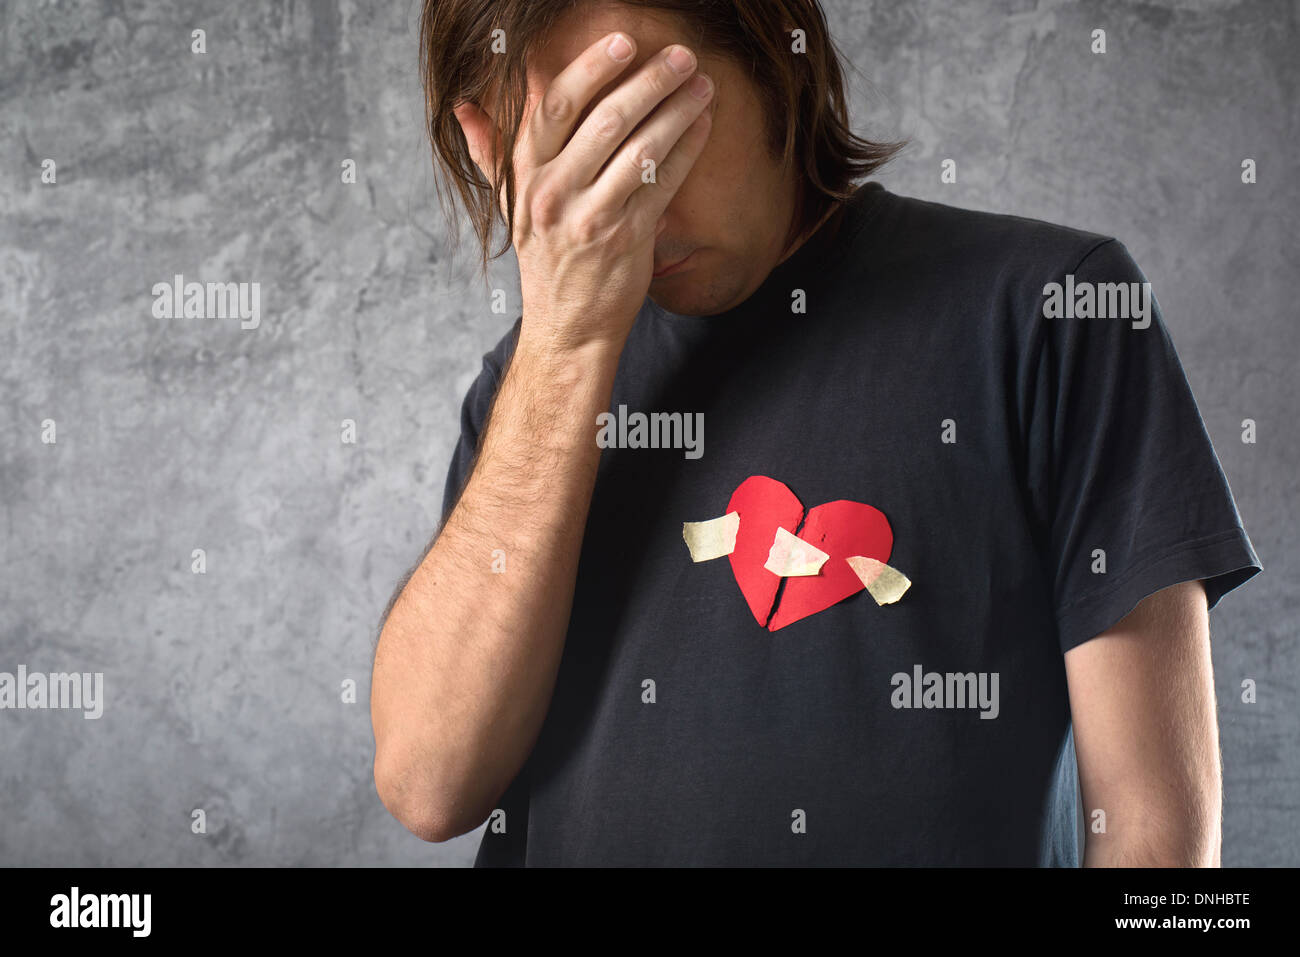 Broken hearted man is crying. Valentines day concept. Broken heart taped to his shirt. Stock Photo